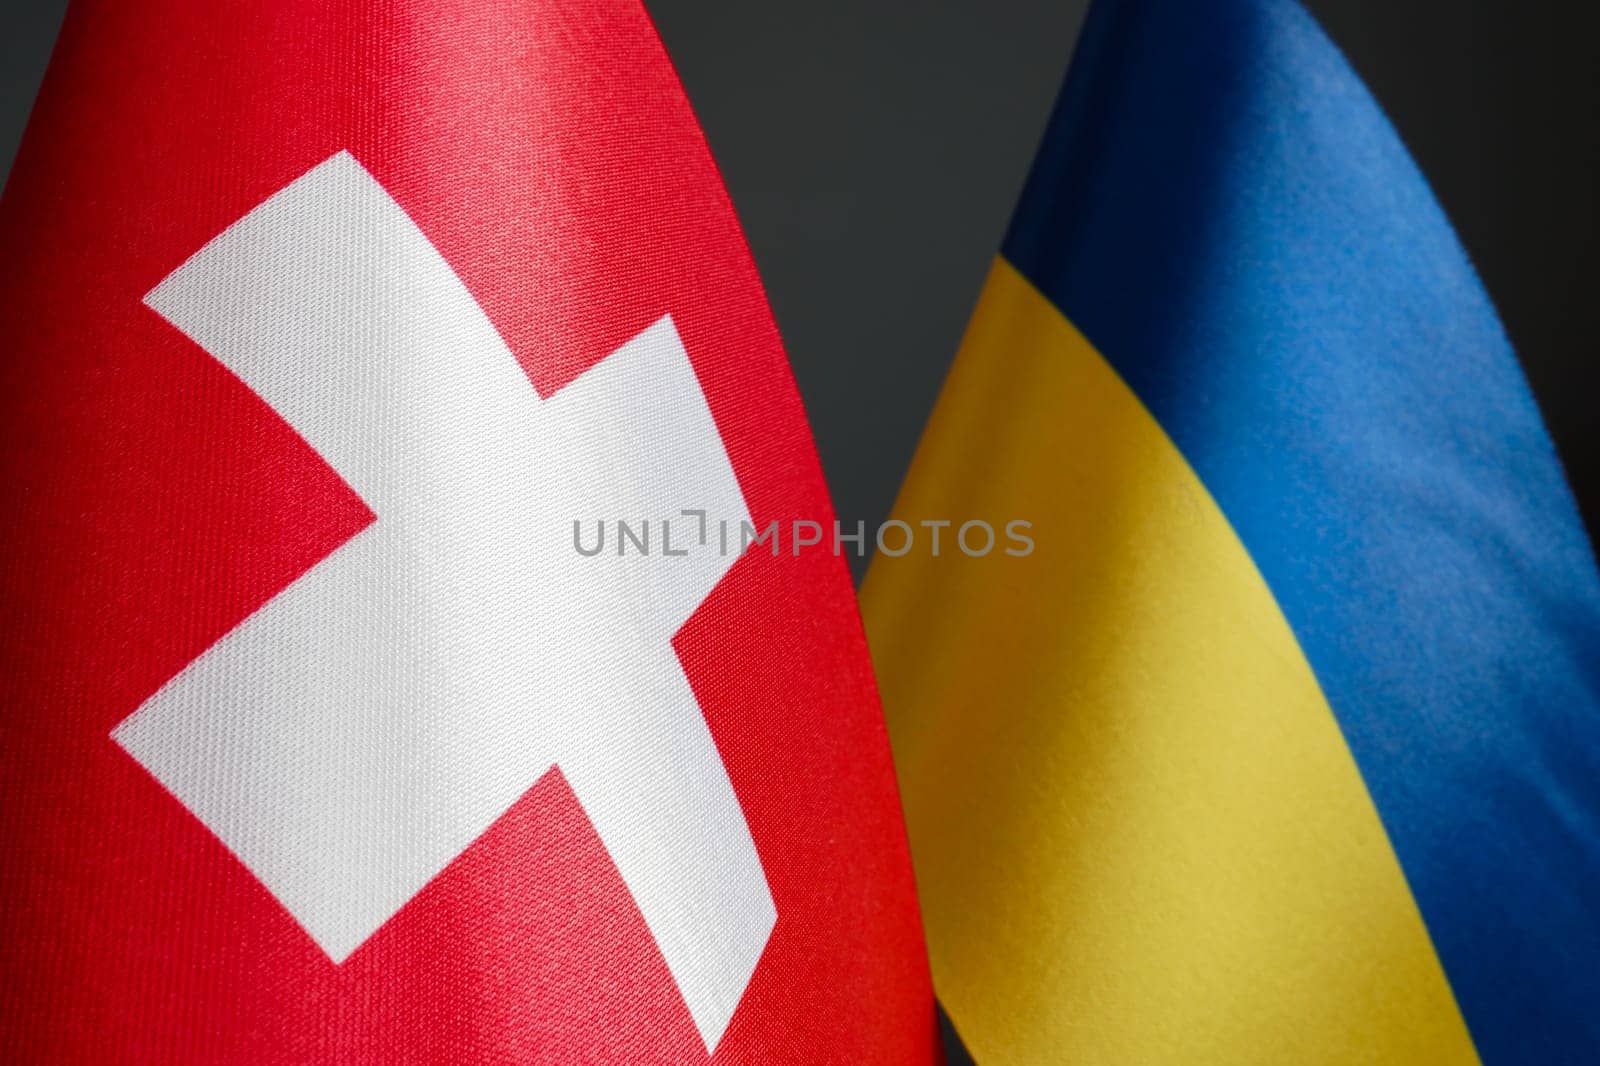 Nearby are small flags of Switzerland and Ukraine. by designer491